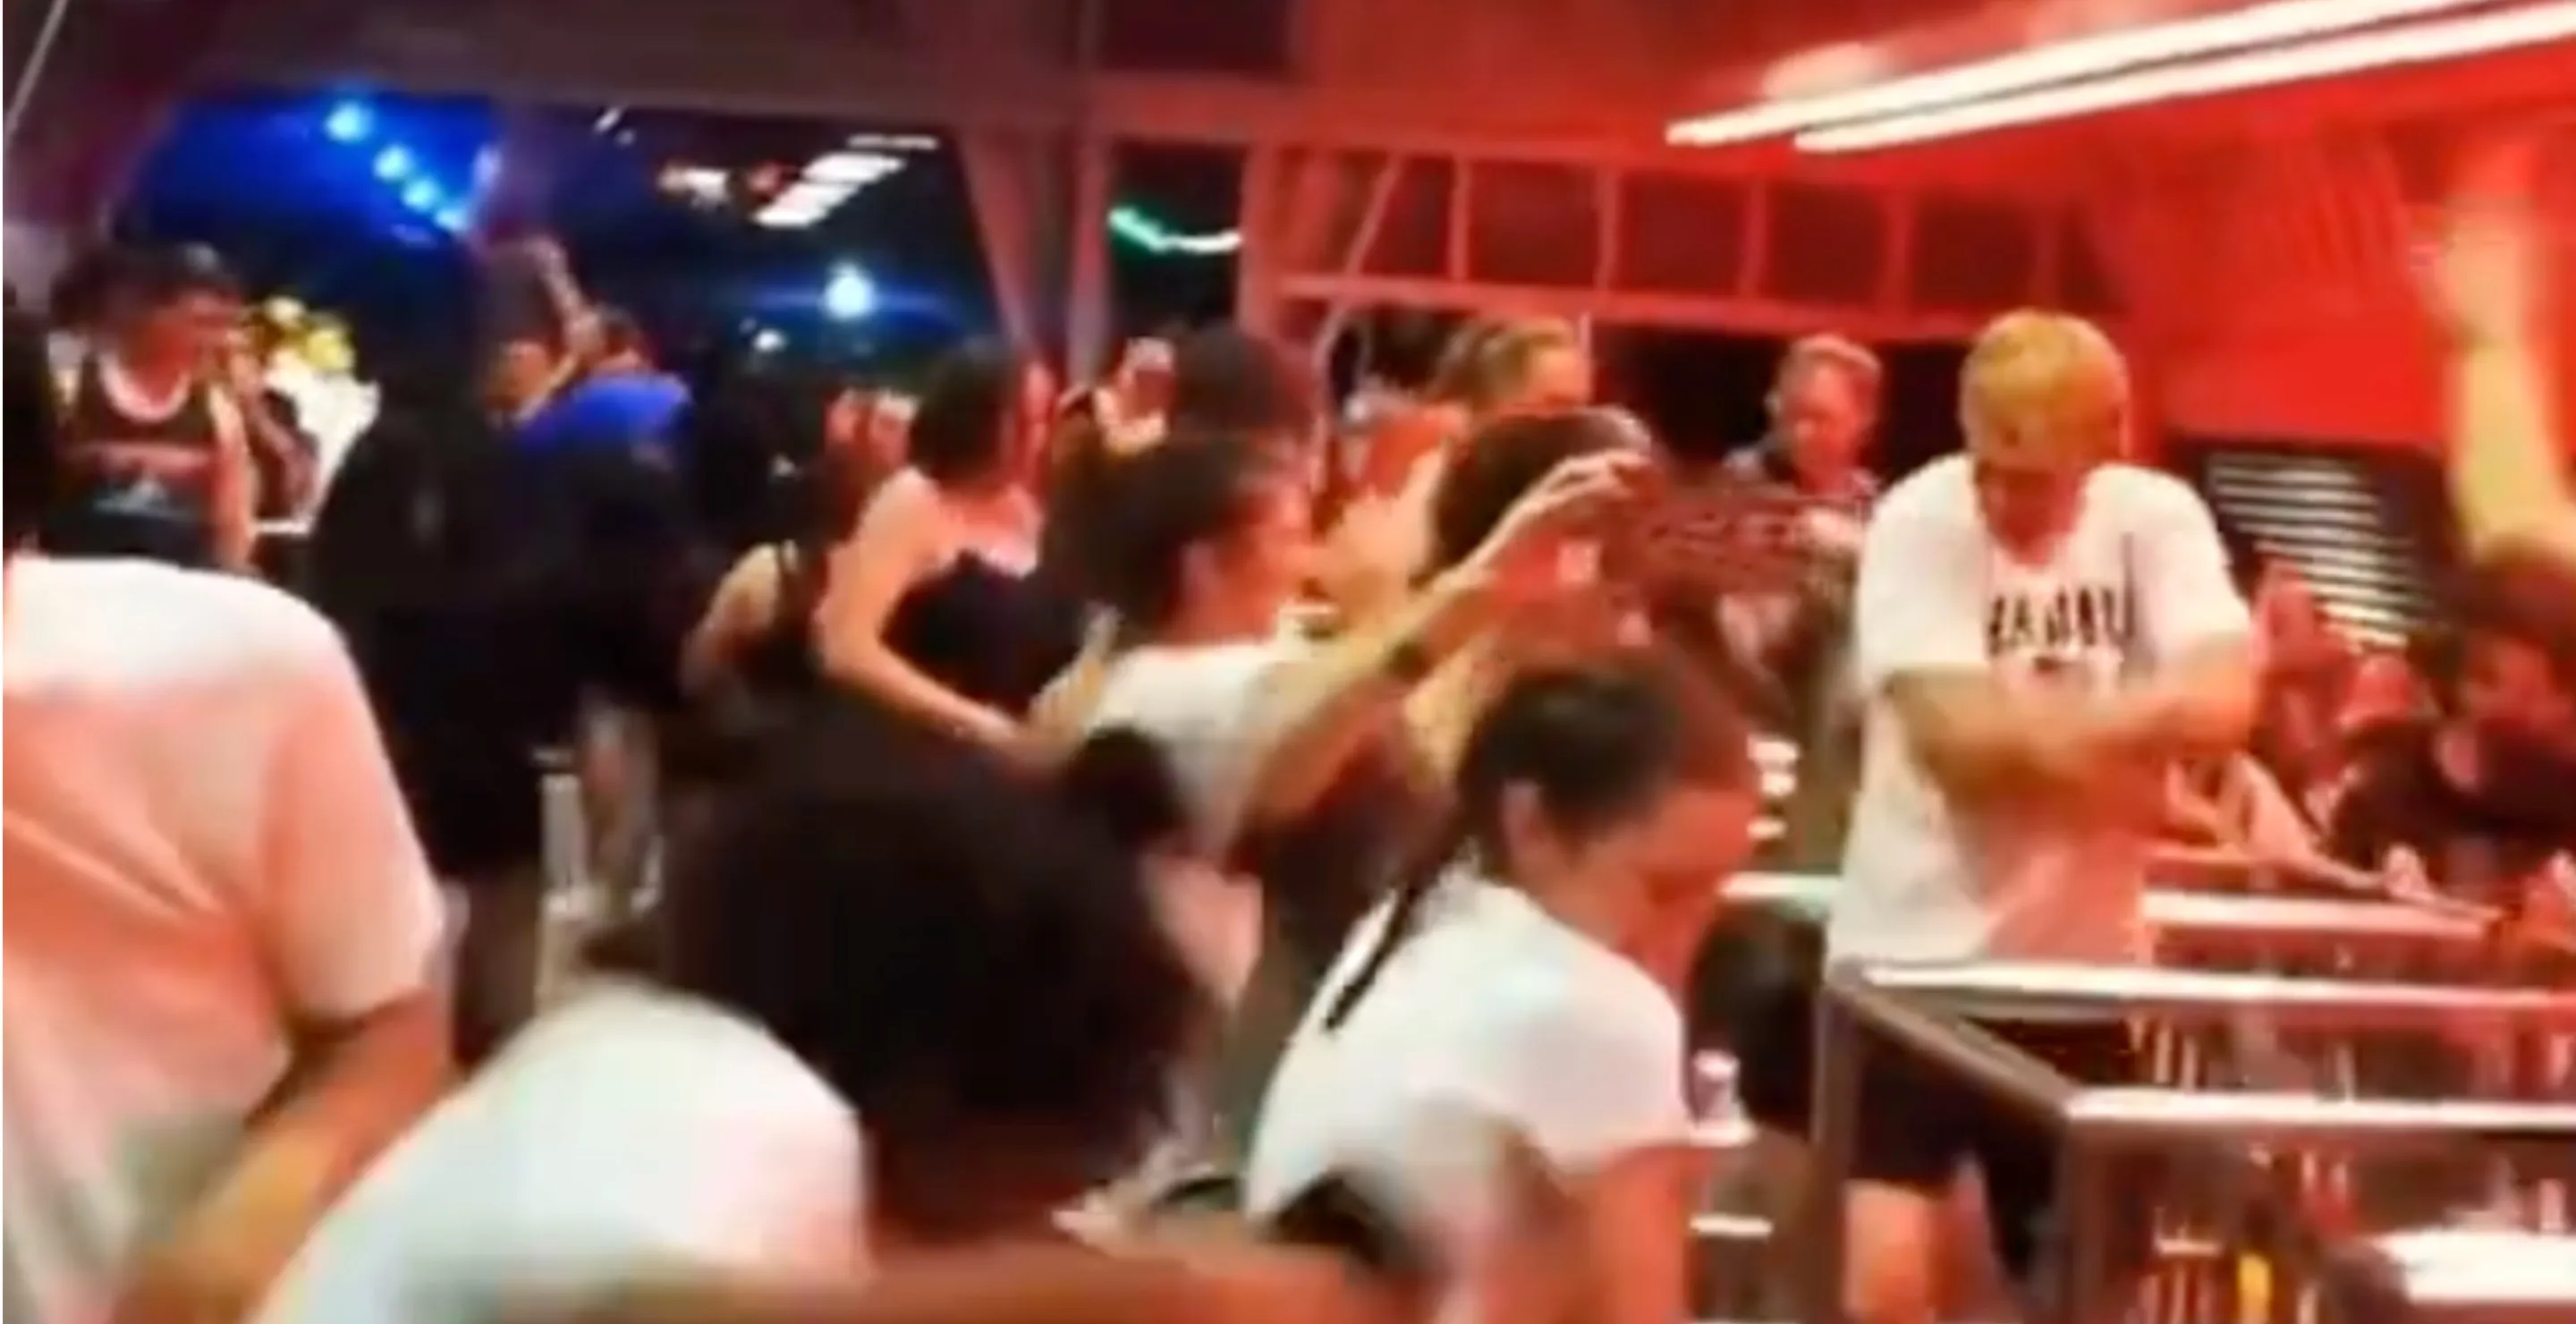 Cedar Point Visitors Battle A Swarm Of Mayflies While Waiting For Ride In Viral Video